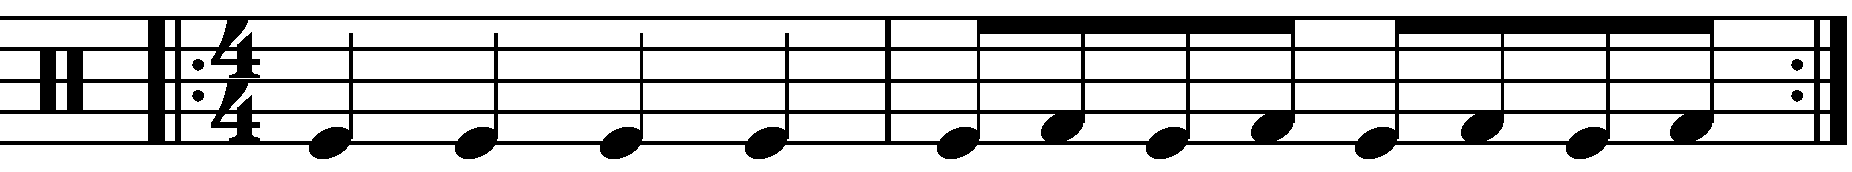 The reversed quarter note to eighth note exercise.